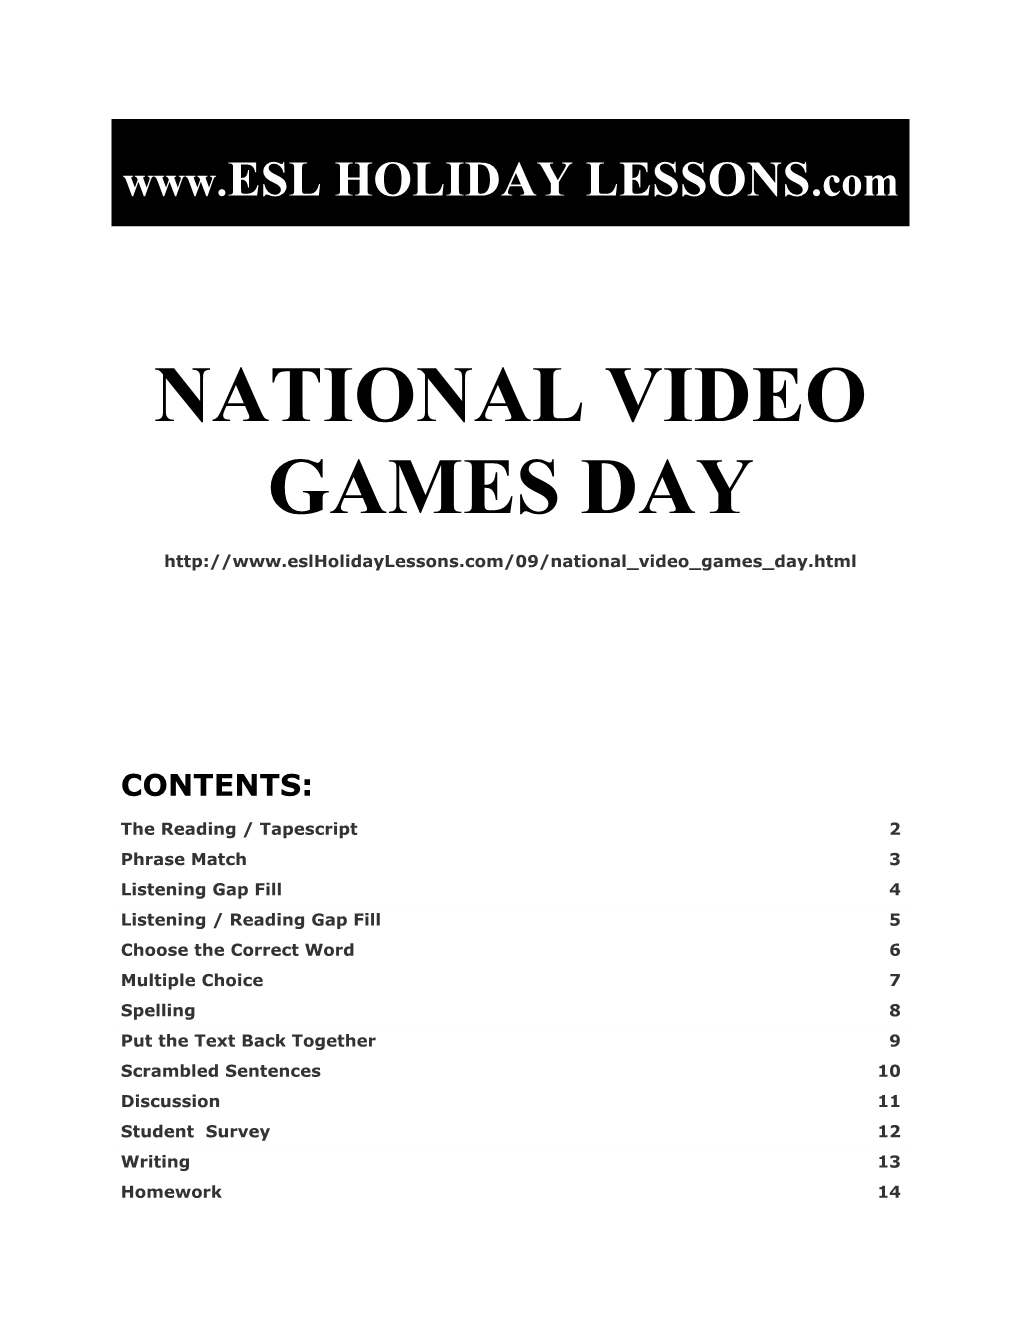 Holiday Lessons - National Video Games Day